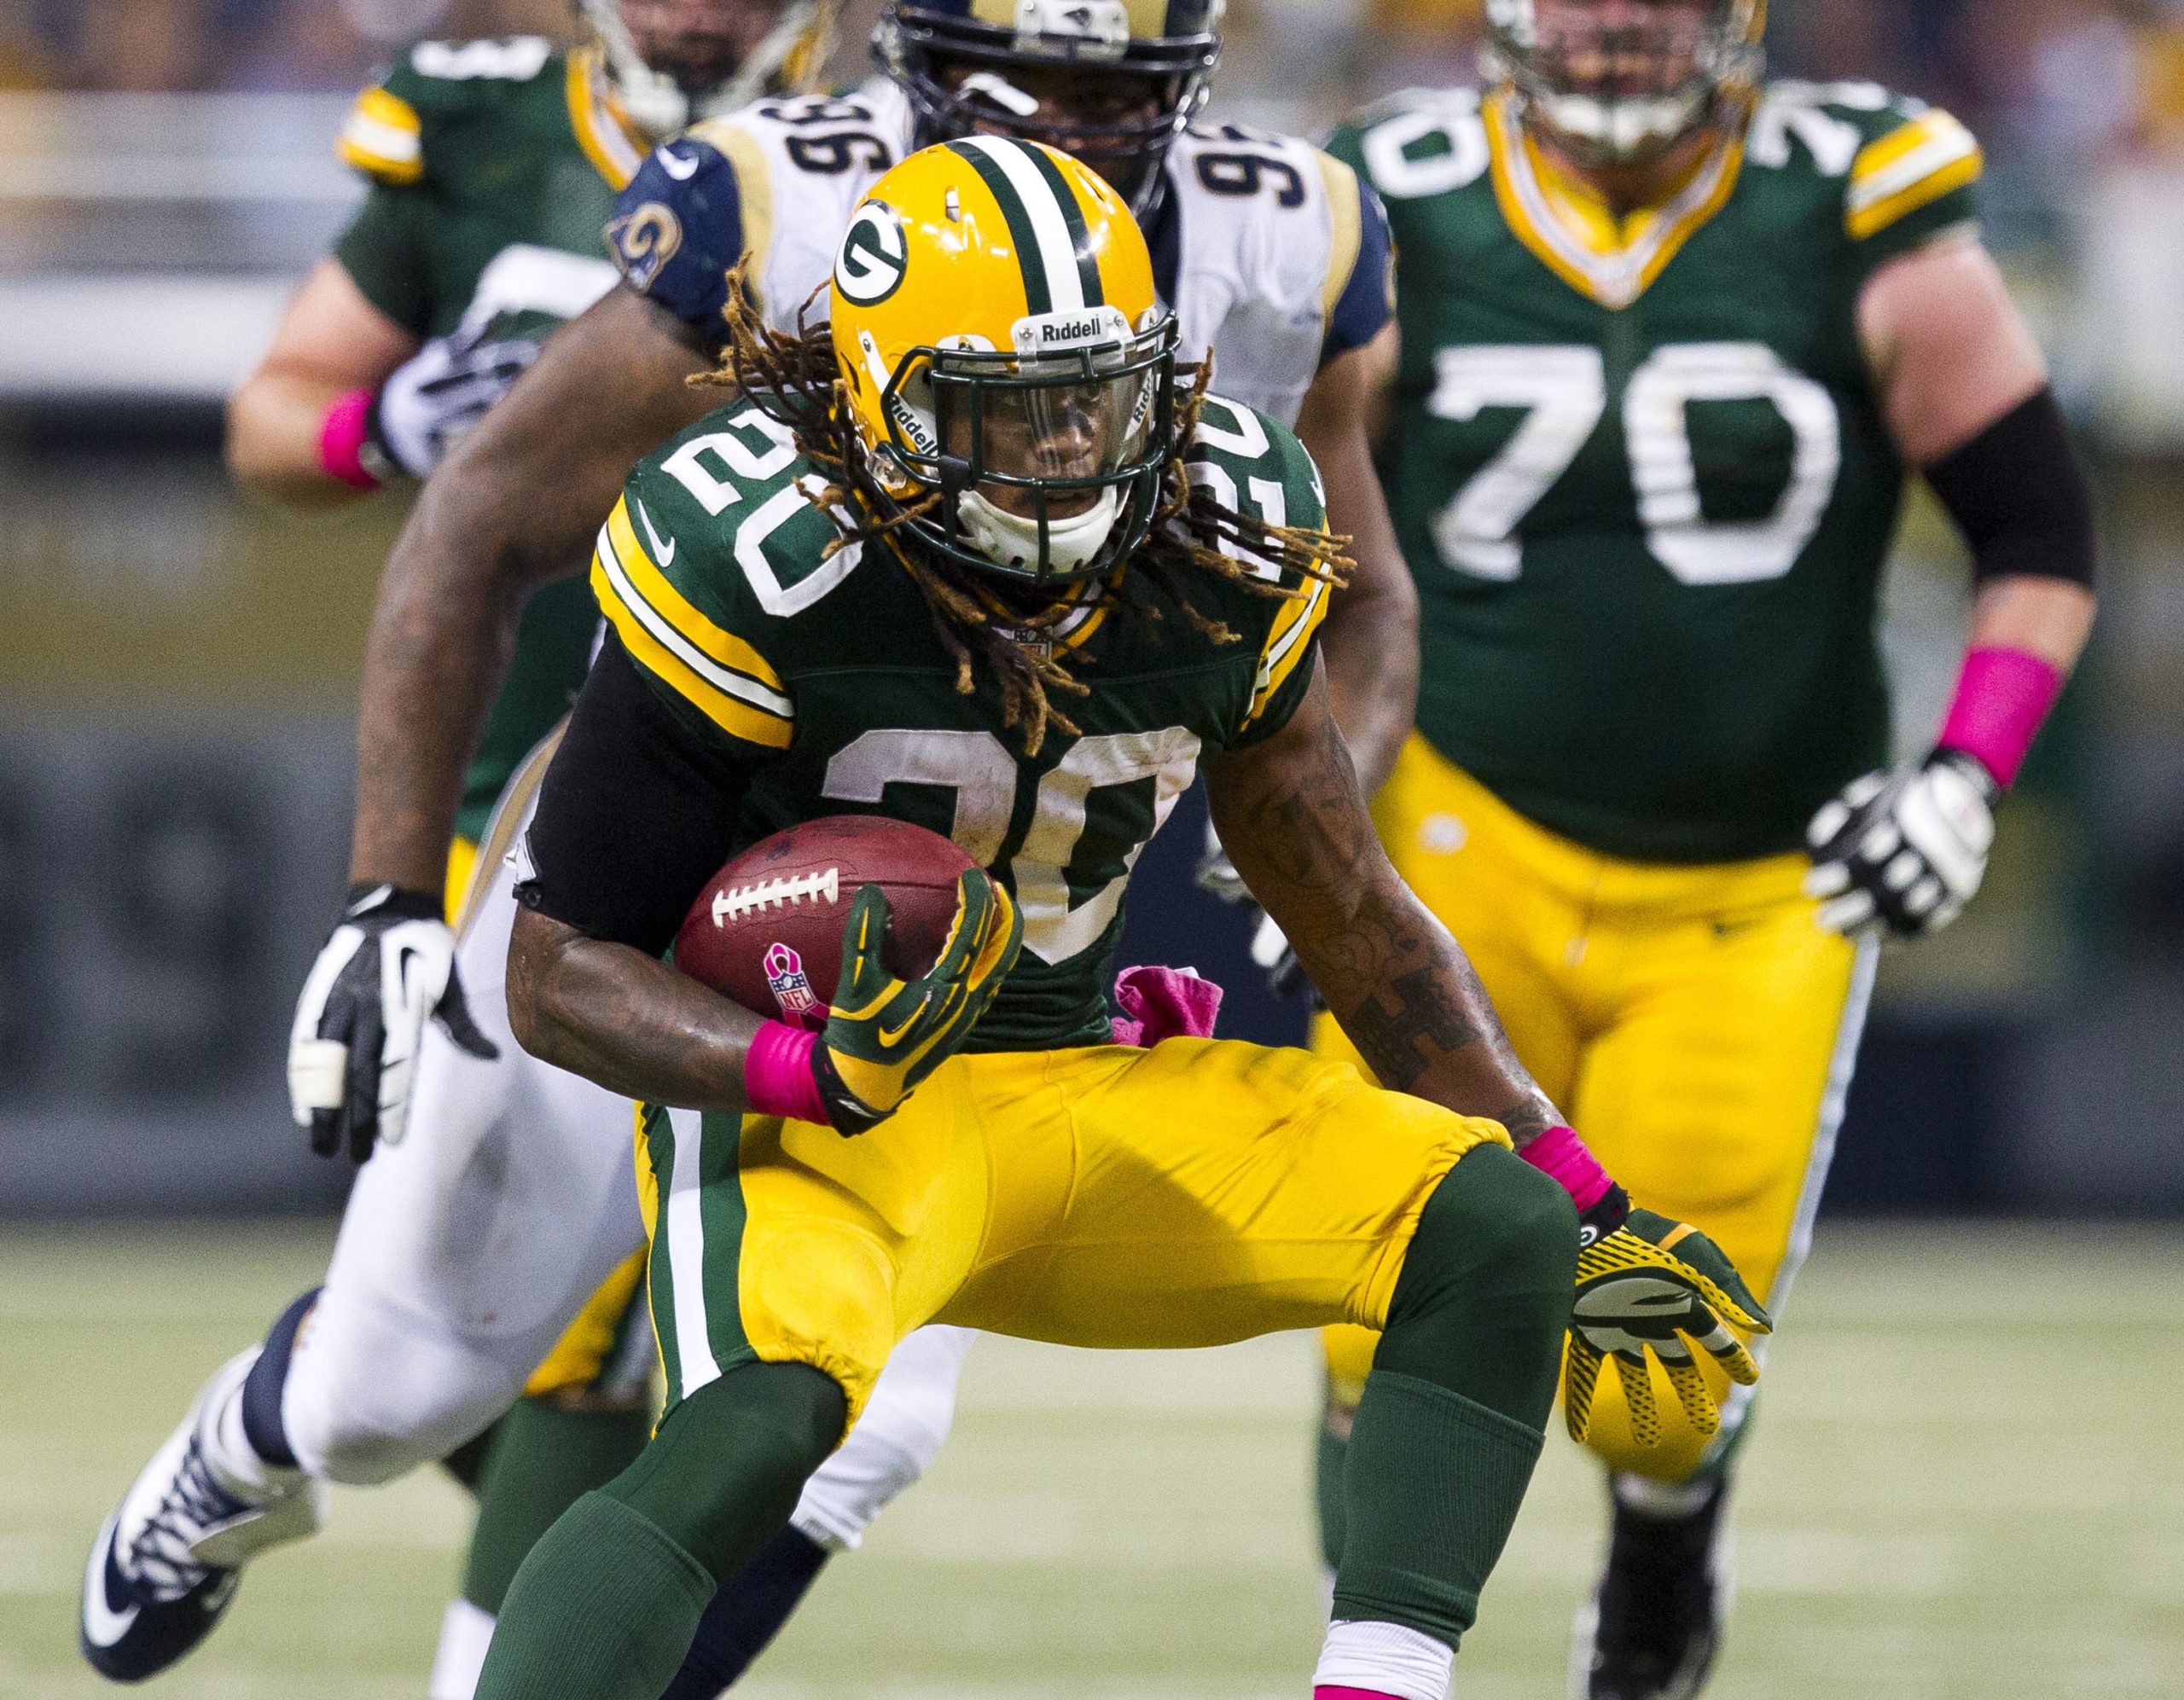 Running back Alex Green of the Green Bay Packers makes a cut to the inside during the game against the St. Louis Rams.